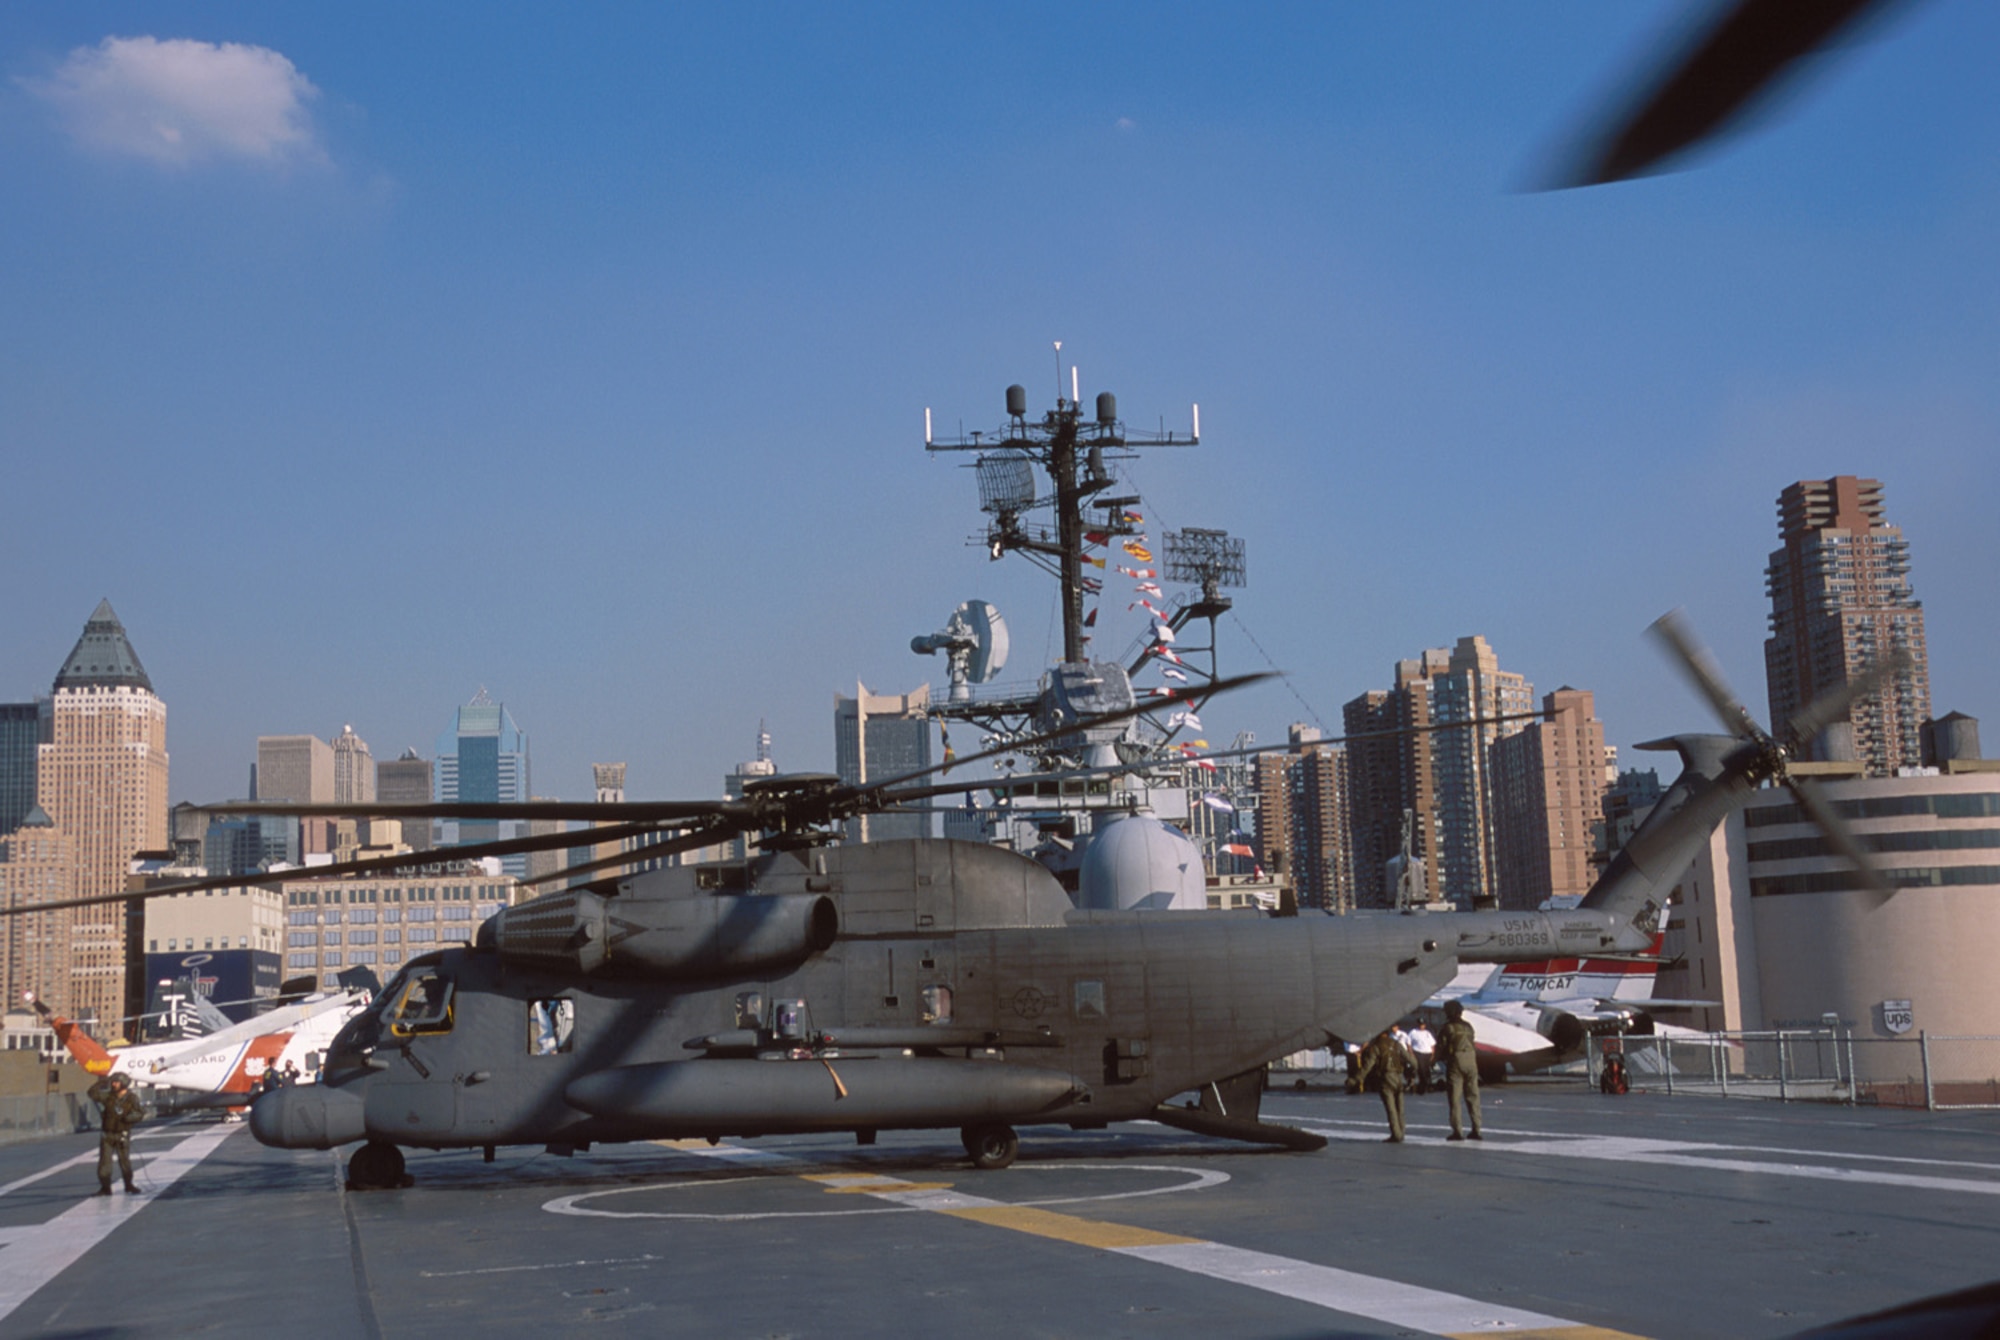 An MH-53, Air Force Special Operations helicpoter from Hurlburt Field, Fla., lands on the USS Intrepid Sea and Air Space Museum in Manahattan from McGuire Air Force Base, N.J., Sept. 13, 2001. The aircraft are being used for relief operations to lower Manhattan, in the wake of the terrorist attacks on the World Trade Center in New York City. (U.S. Air Force photo by Gary Ell) (Released
